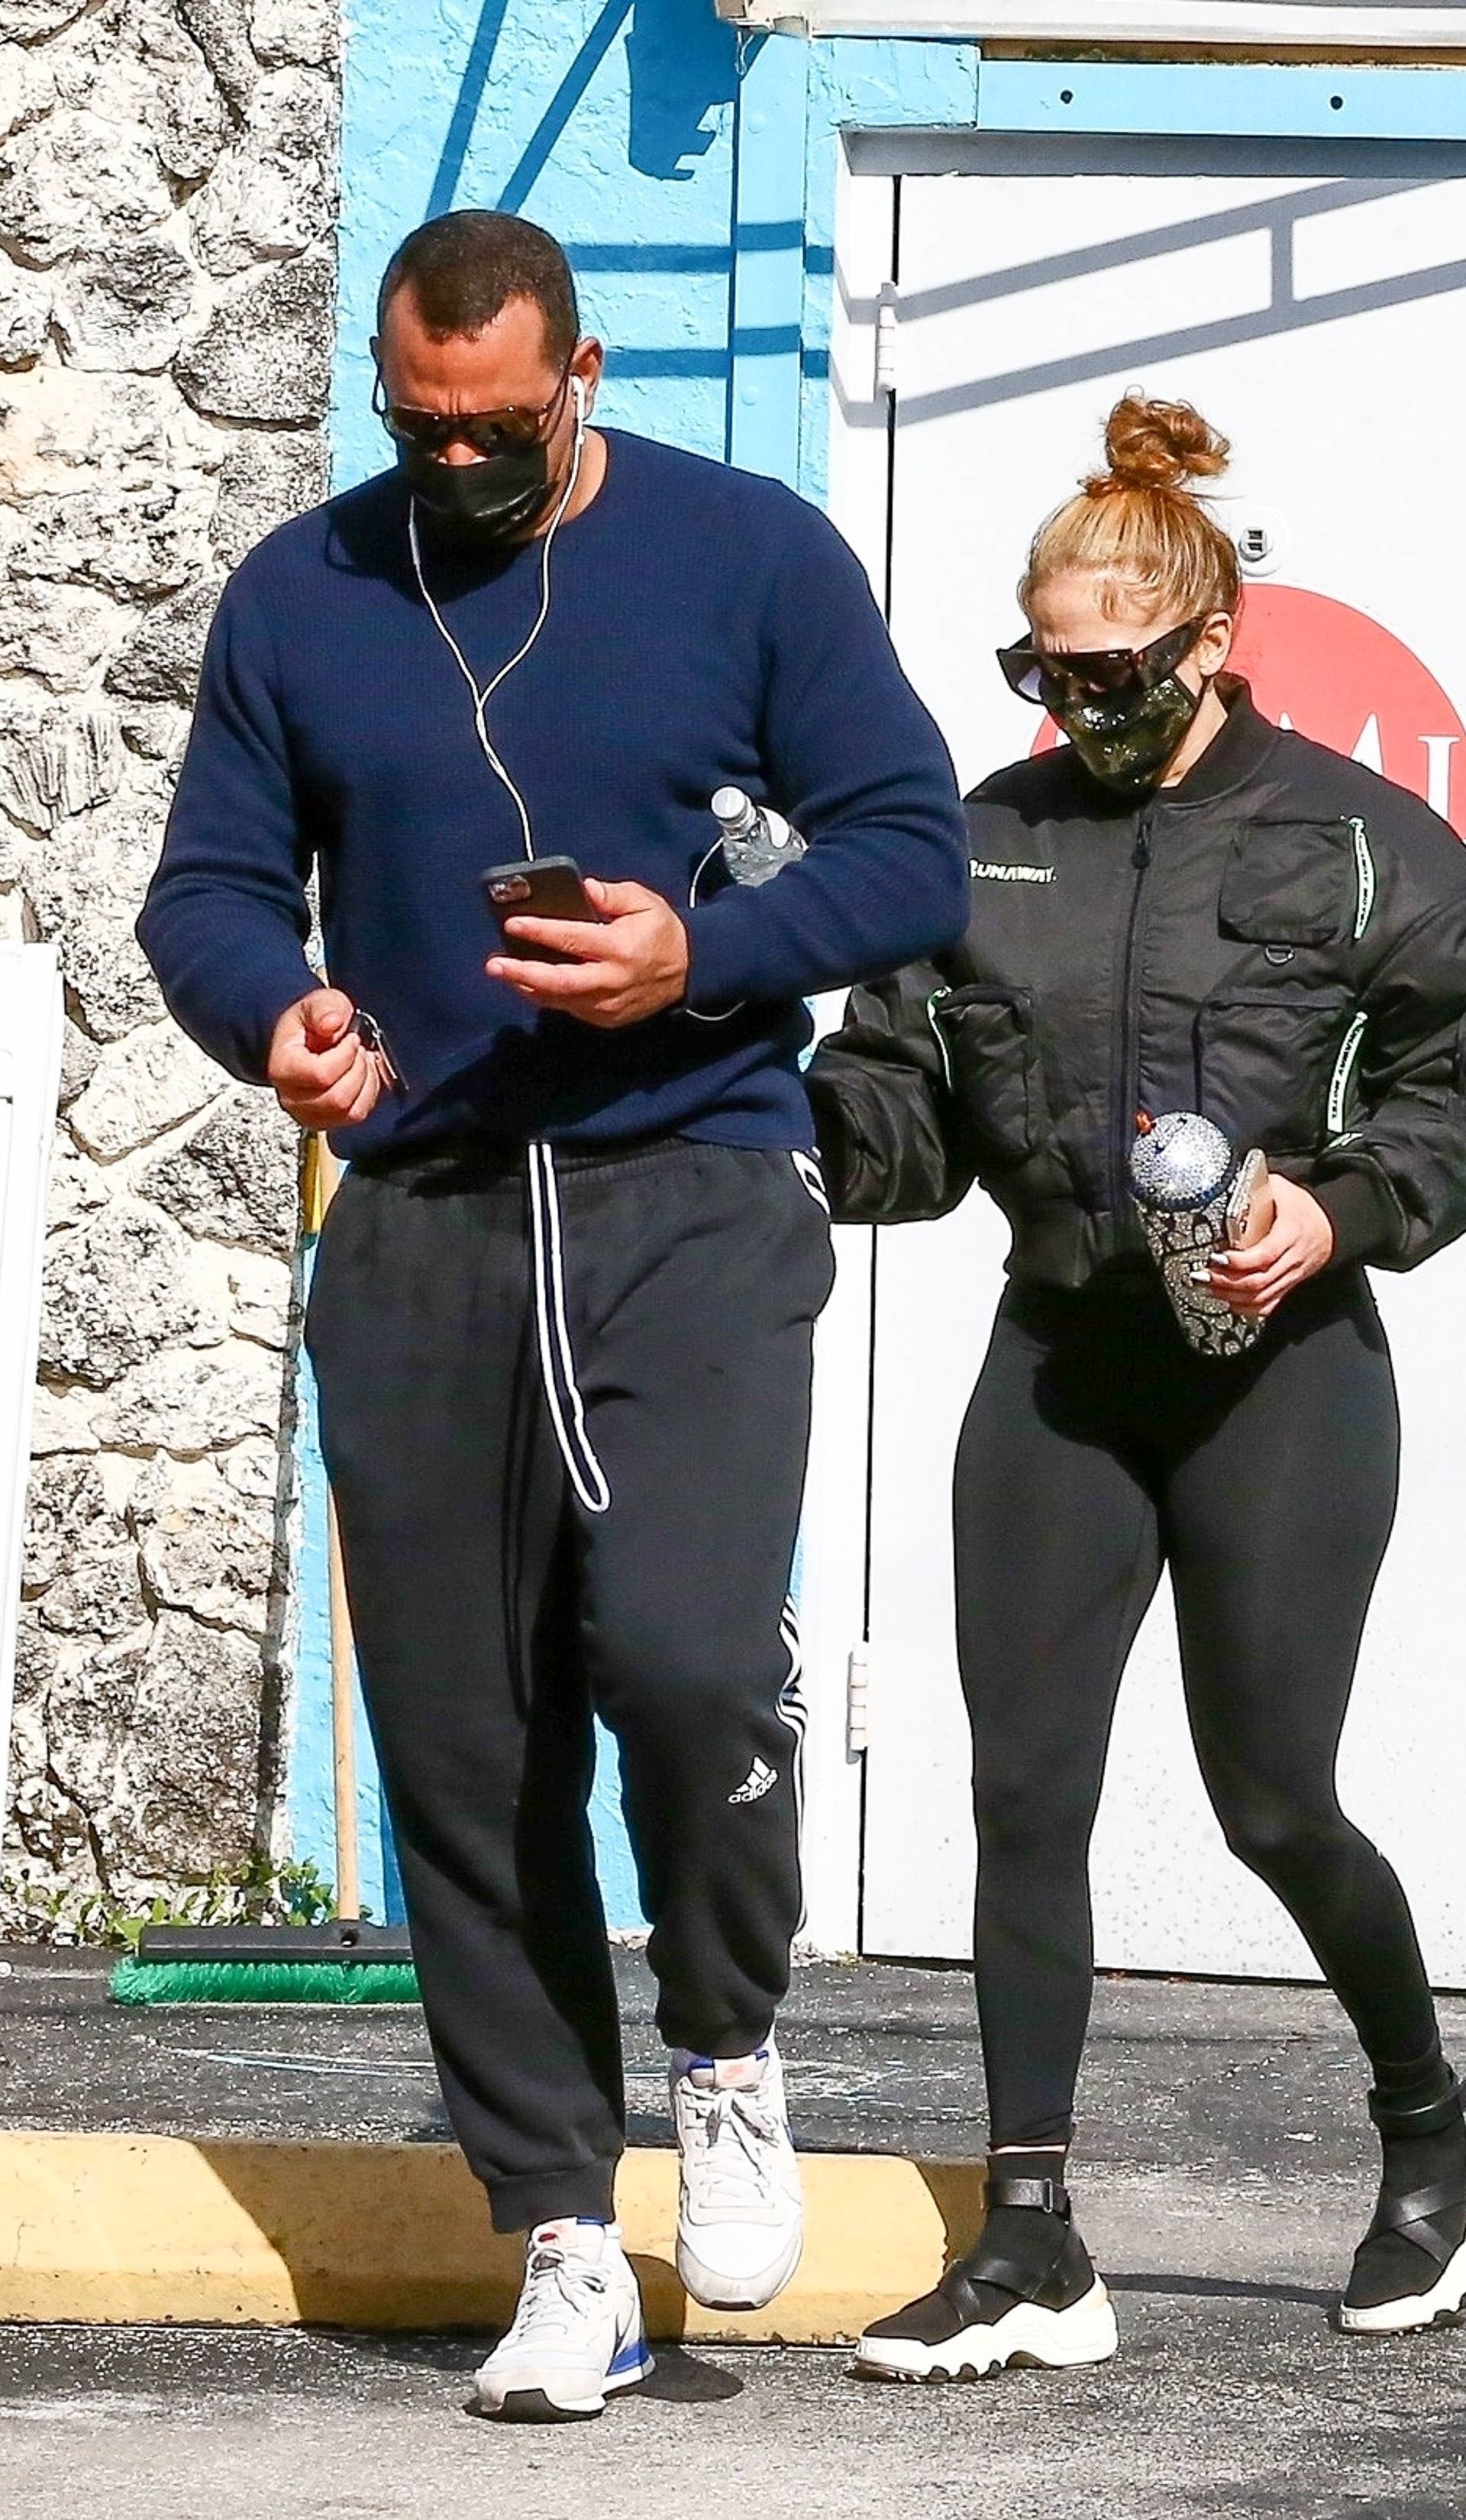 Jennifer Lopez and Alex Rodriguez get their sweat on at the gym